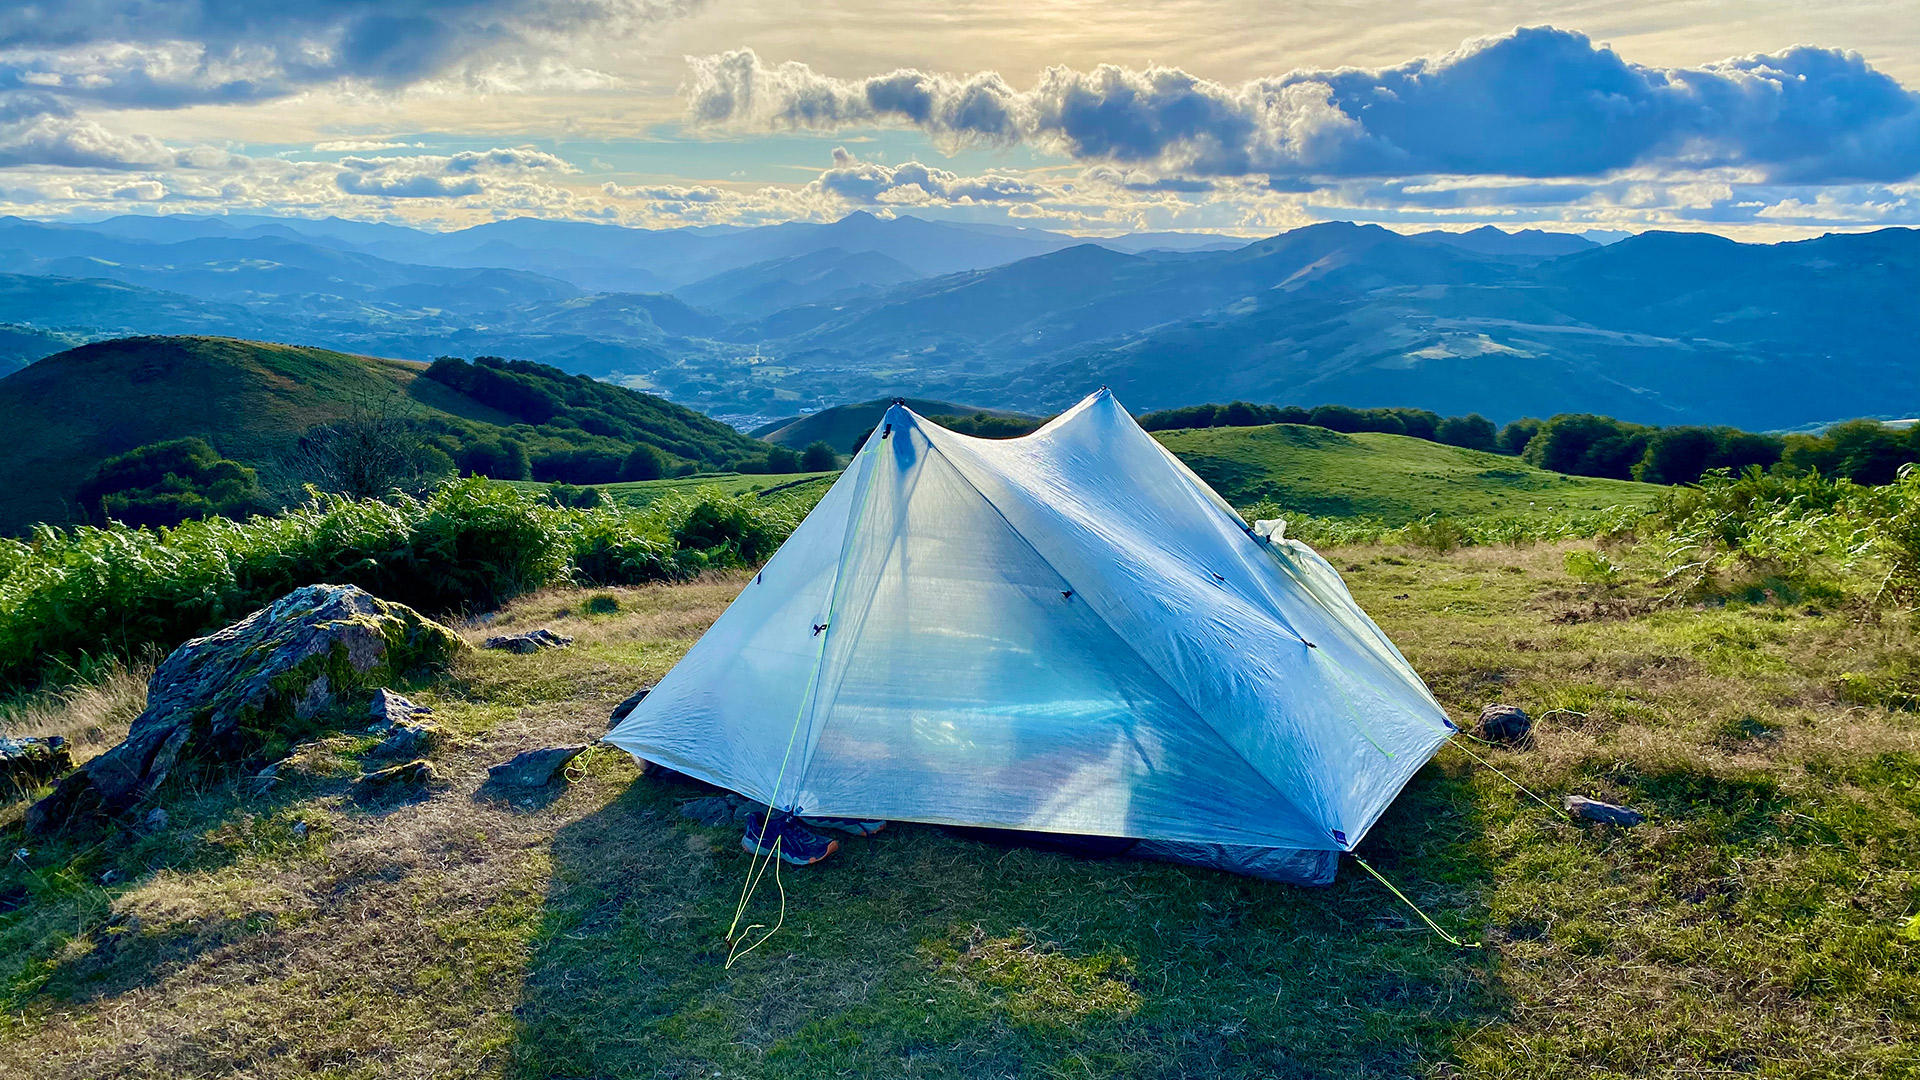 Tent on grassy surface with mountains in the background